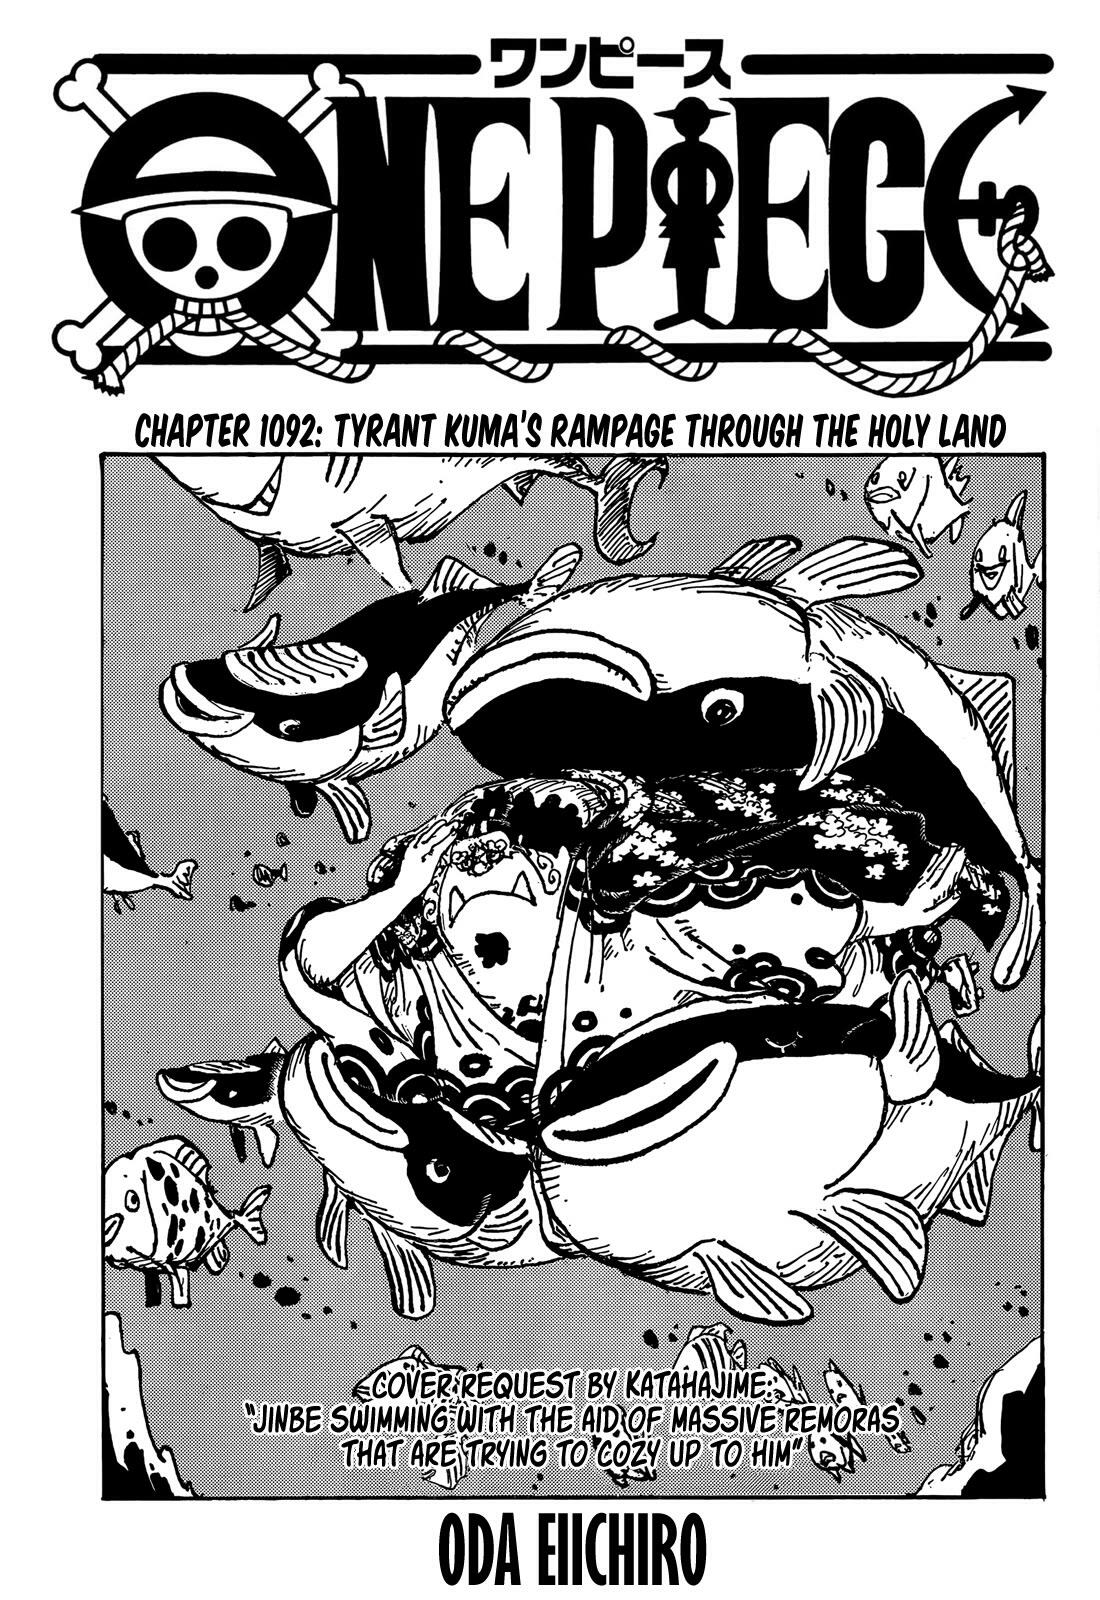 One Piece Chapter 1061 Spoilers: From Enemies to Friends